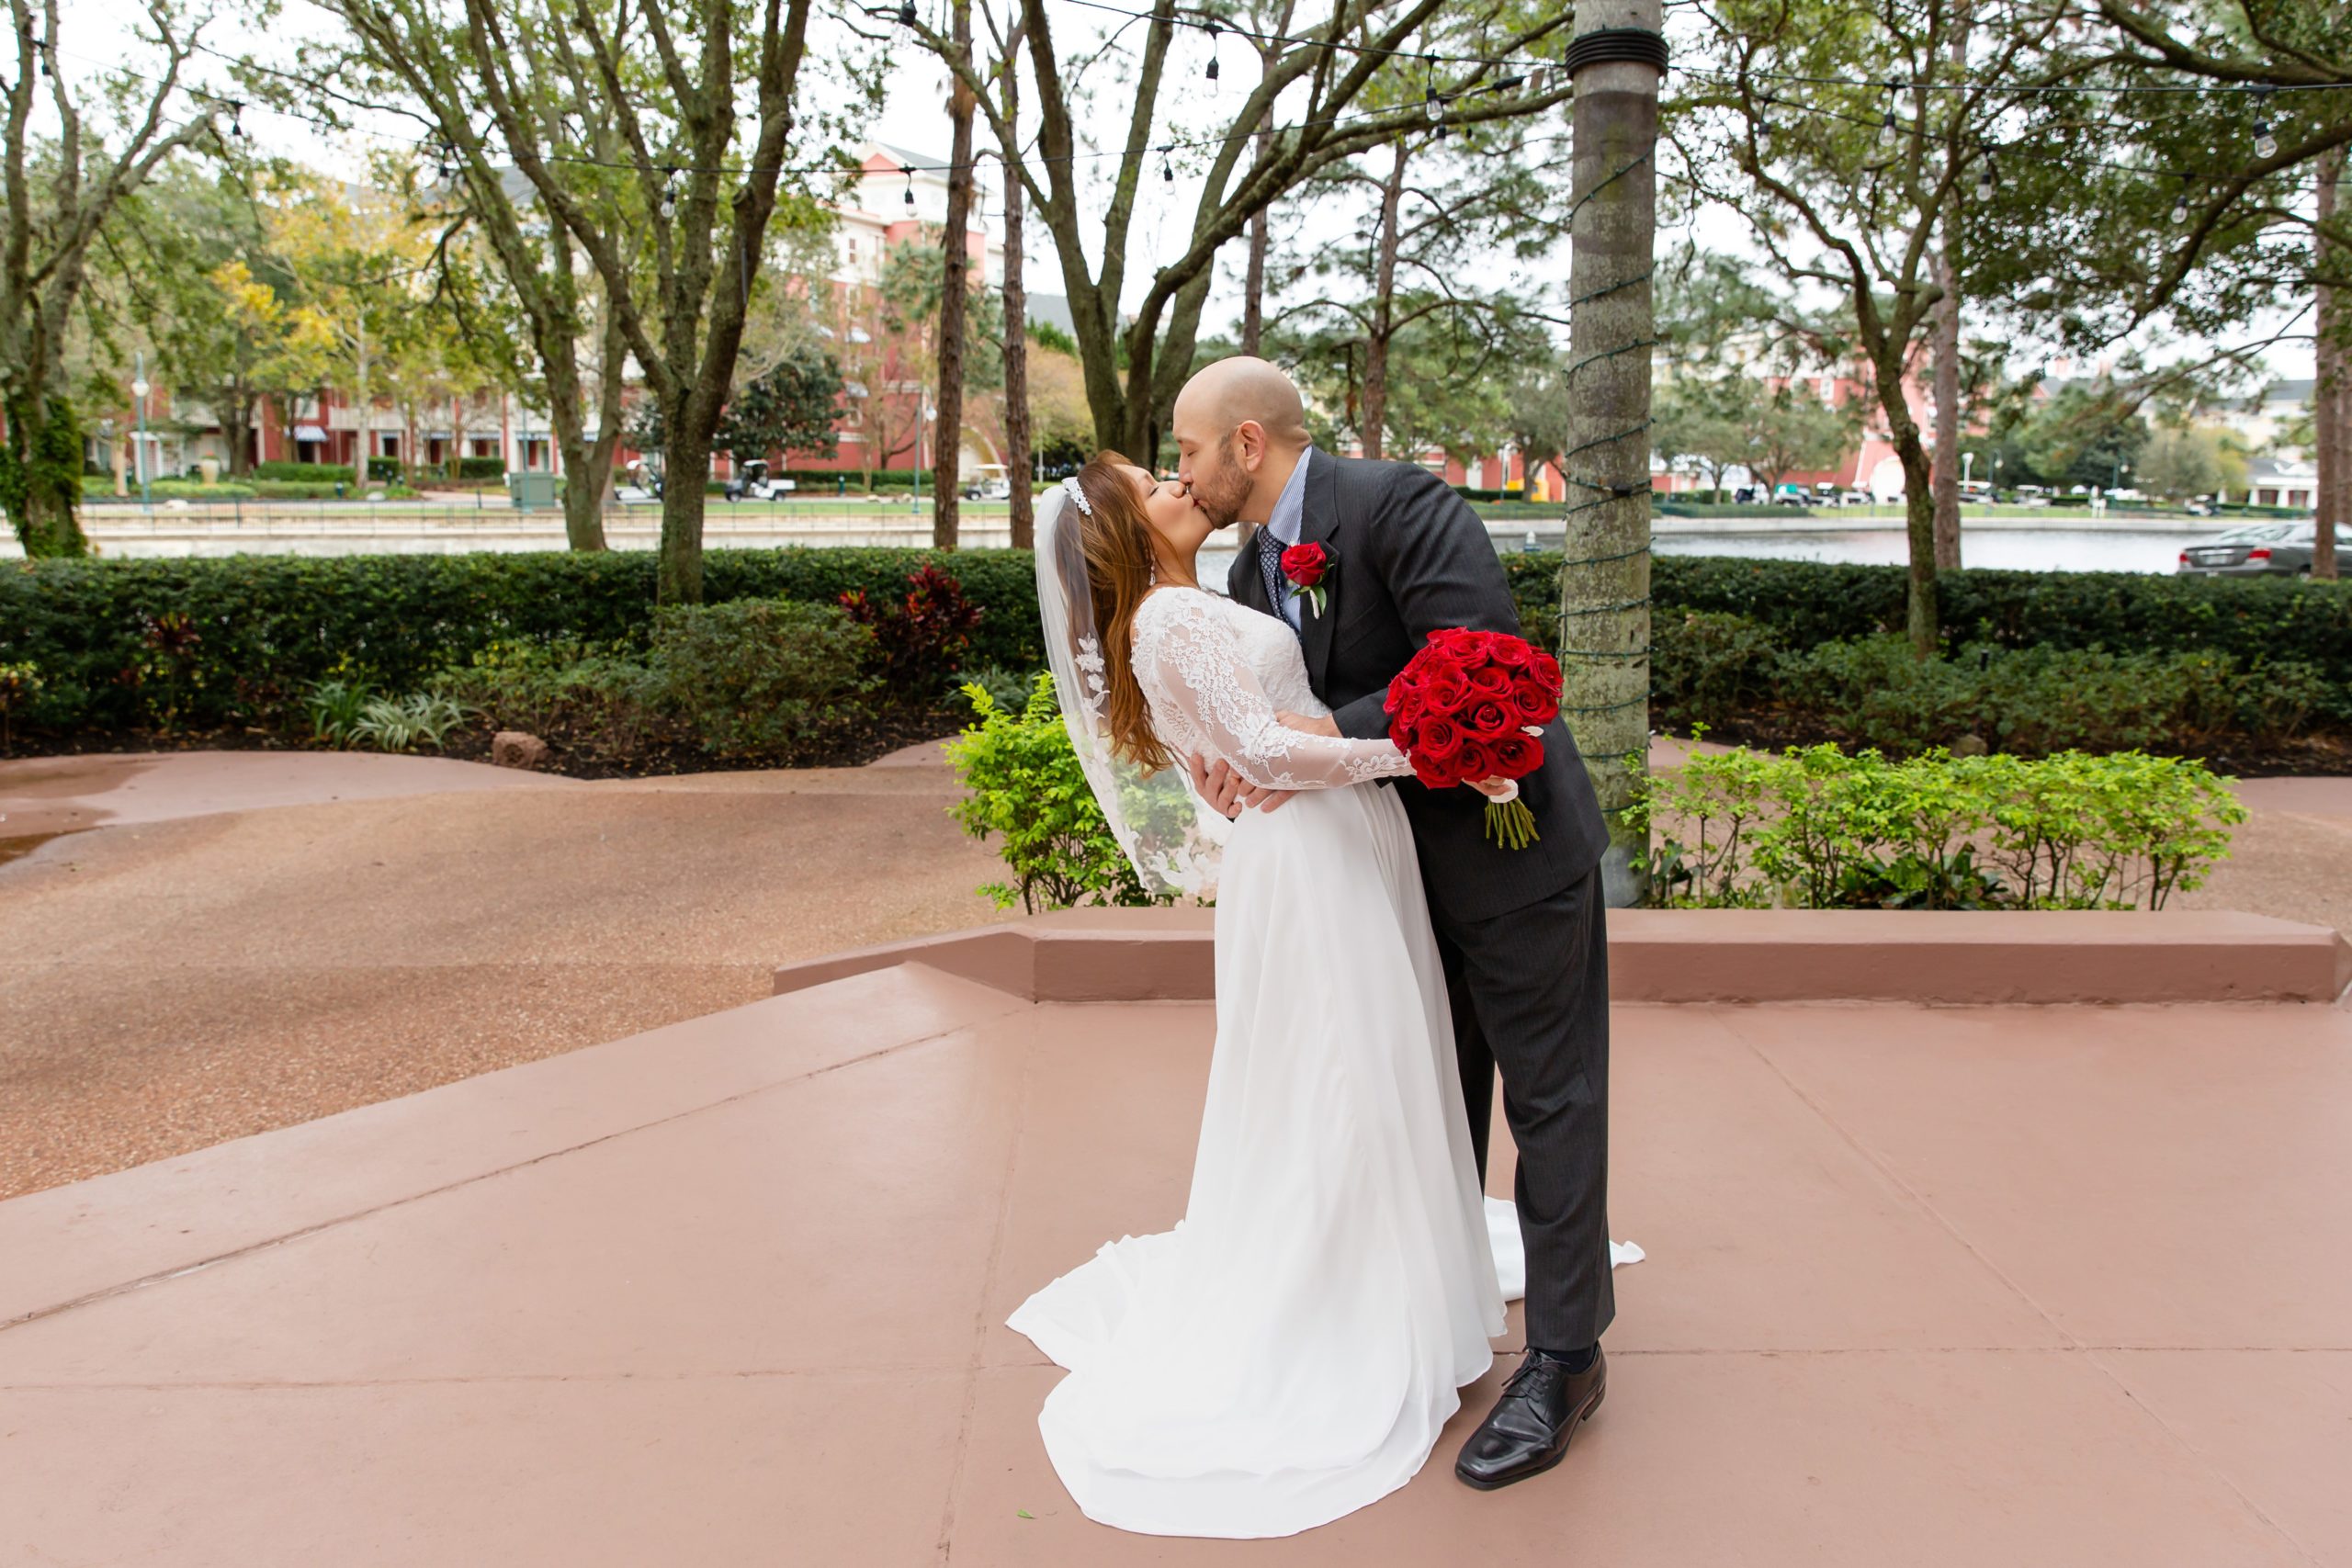 Groom dipping Bride and kissing with red rose bouquet after eloping at Disney Swan Resort in Orlando, FL